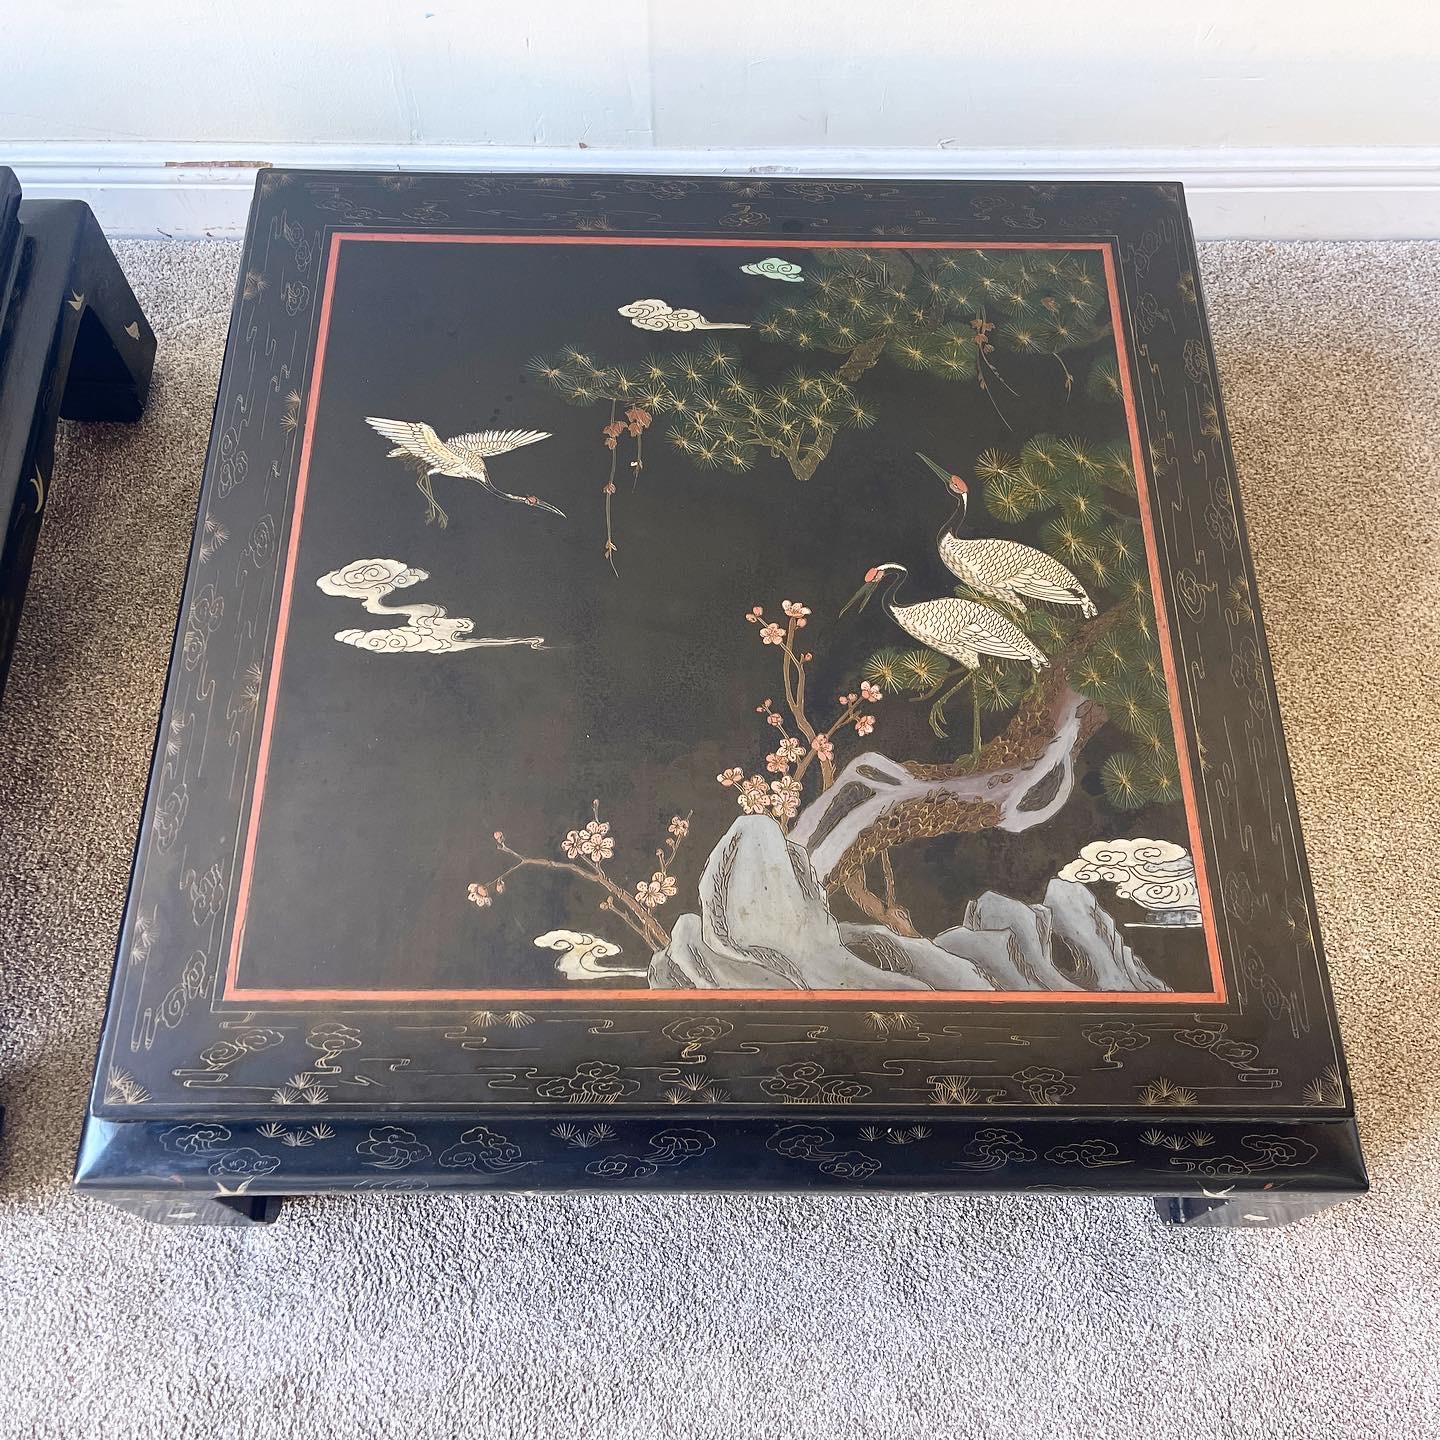 Hong Kong Chinoiserie Black Lacquered Square Coffee Tables